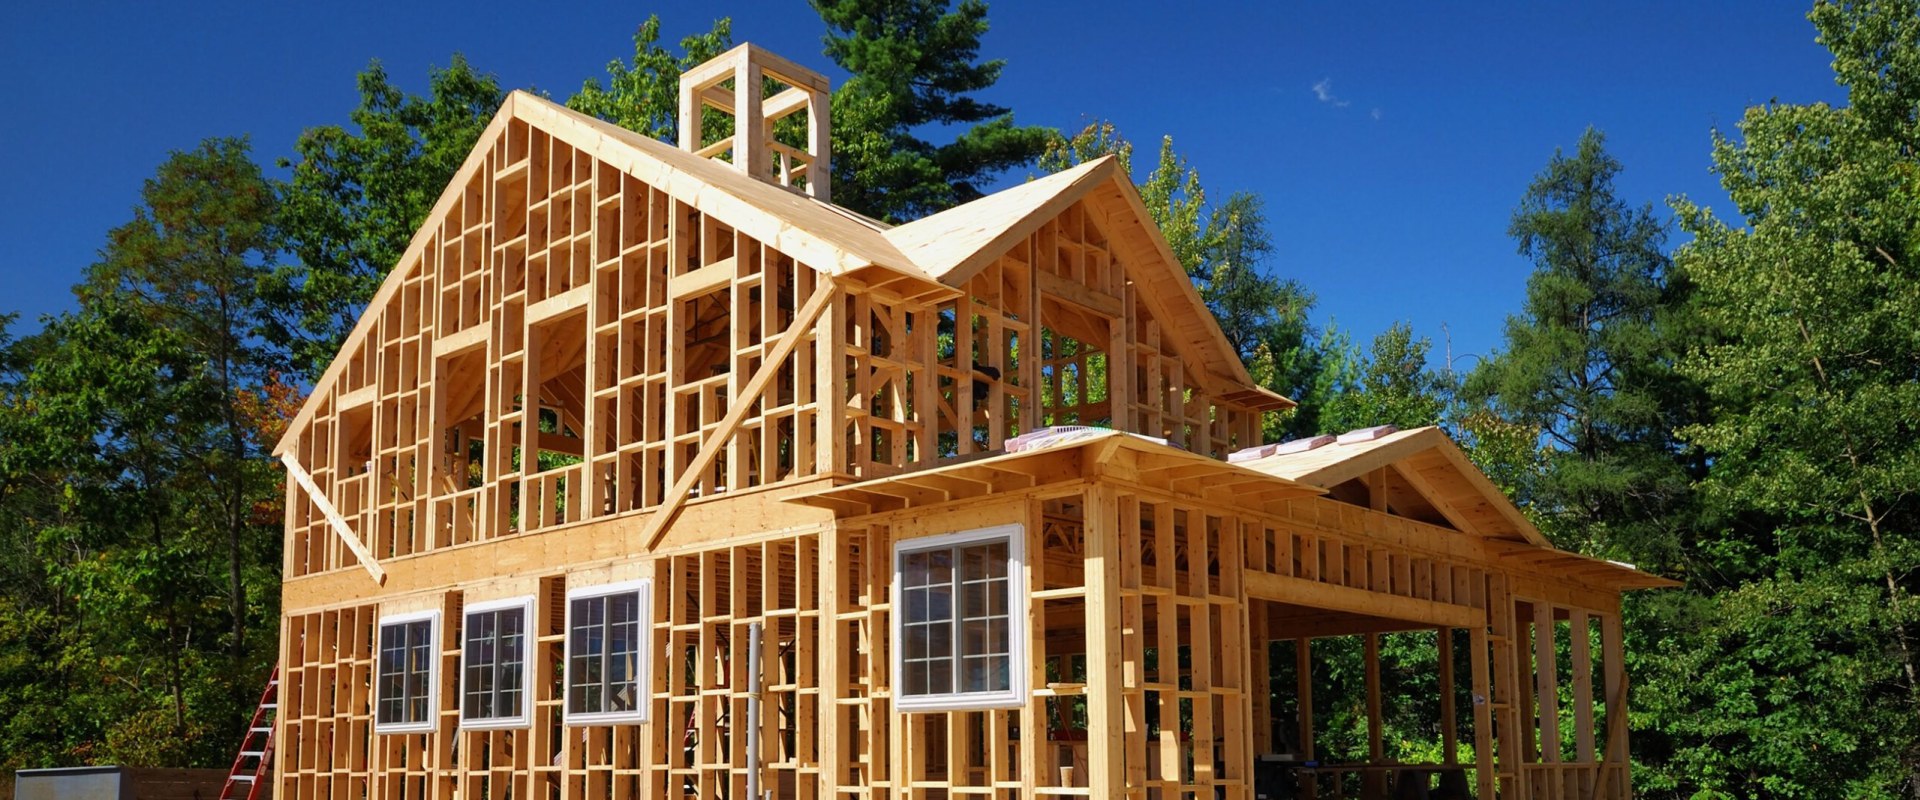 Understanding Permits and Regulations for Residential Construction and Remodeling